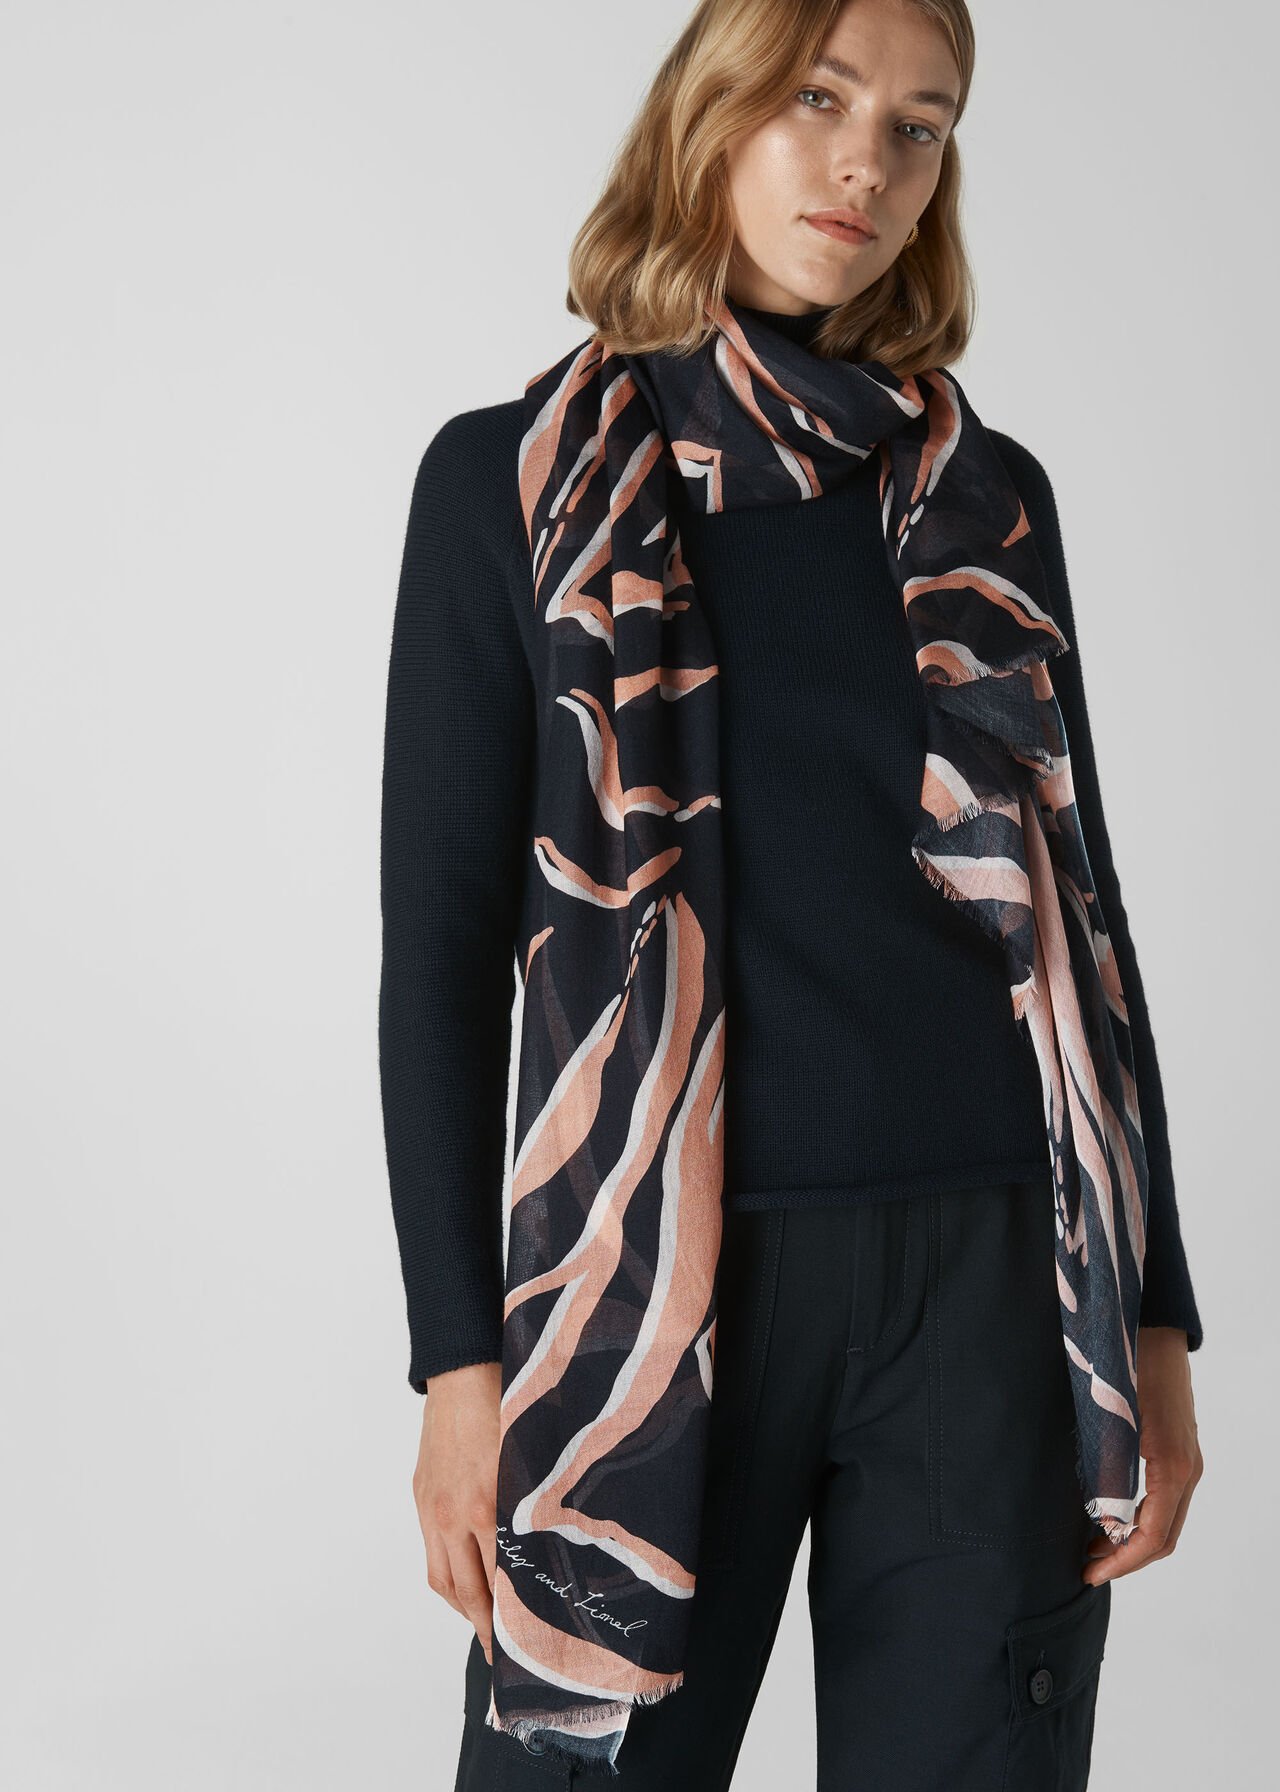 Black/Multi Lily And Lionel Zebra Scarf | WHISTLES | Whistles